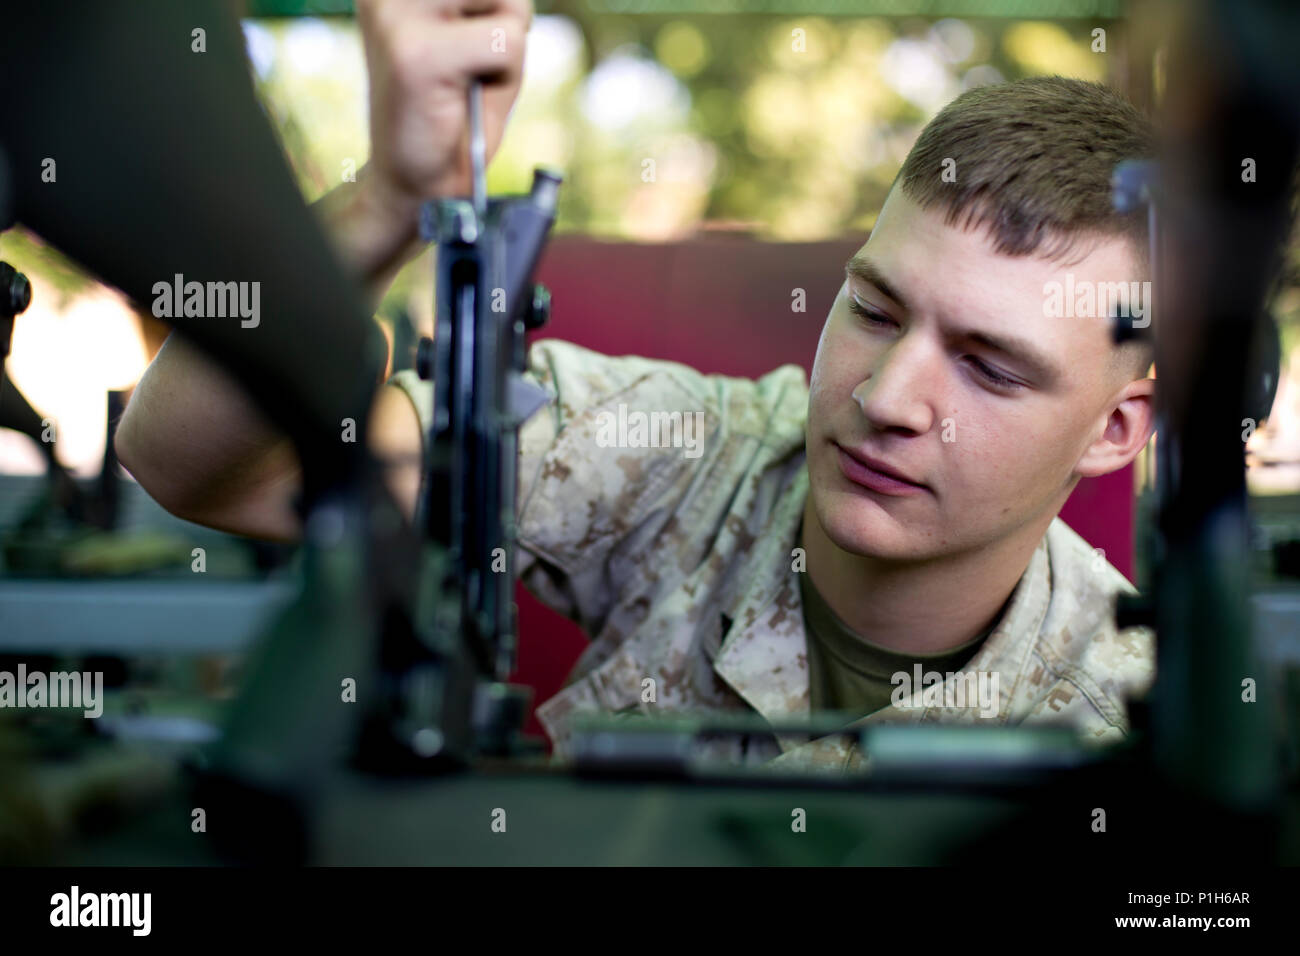 U.S. Marine Corps Lance Cpl. Kelly R. Keating, a small arms technician with the Armory, Service Company, Headquarters and Service Battalion, inspects a M16A4 rifle at Marine Corps Recruit Depot San Diego, Calif., Oct. 25, 2016. Keating ensured that the upper receiver of each rifle was returned in a serviceable condition. (U.S. Marine Corps photo by Lance Cpl. Robert G. Gavaldon) Stock Photo